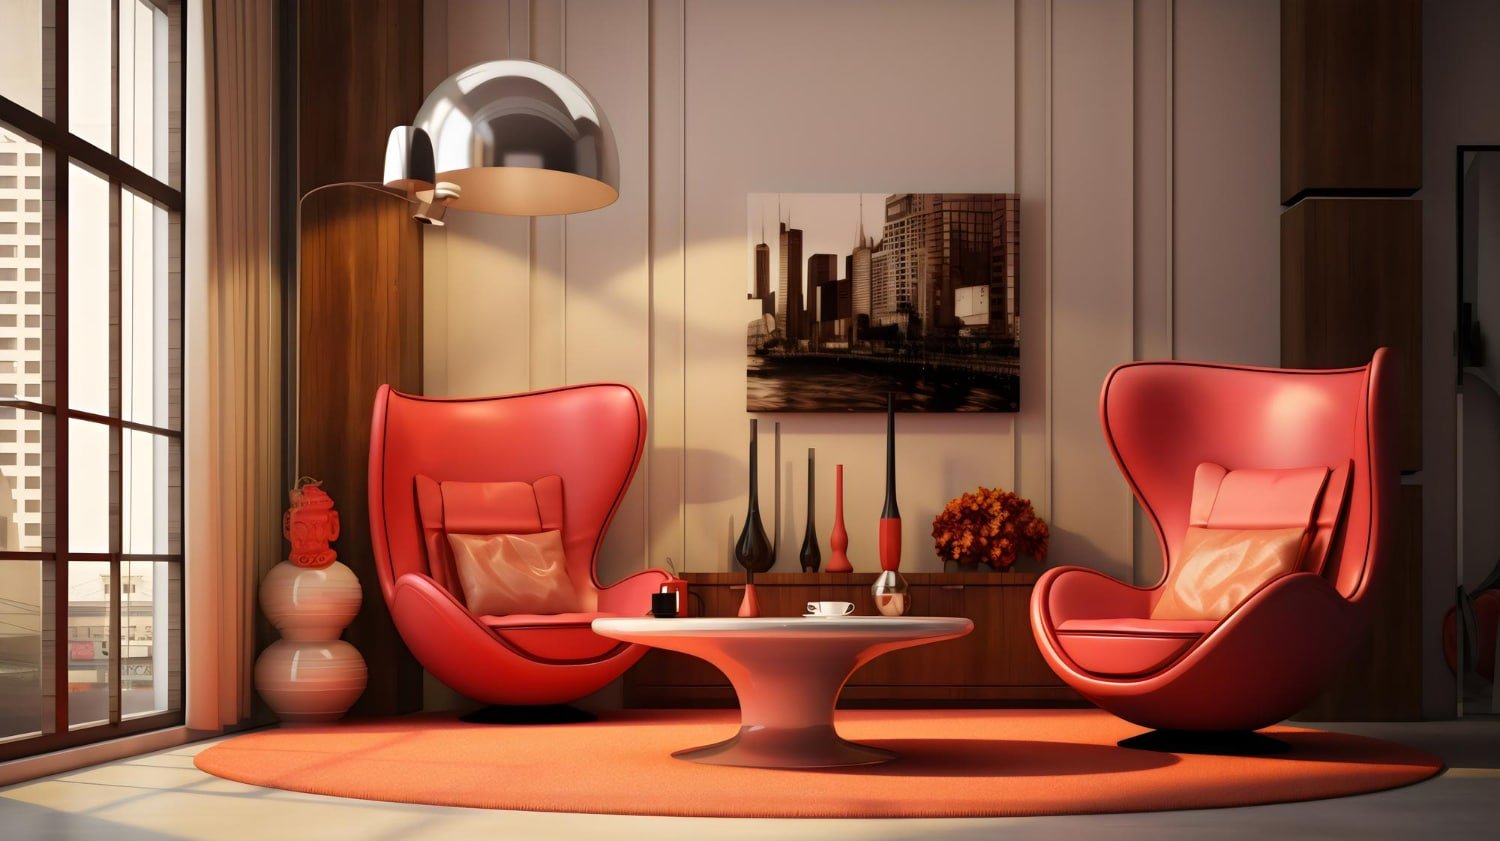 You are currently viewing Furnish Your Home With Style With Rove Concepts’s Modern Furniture Designs